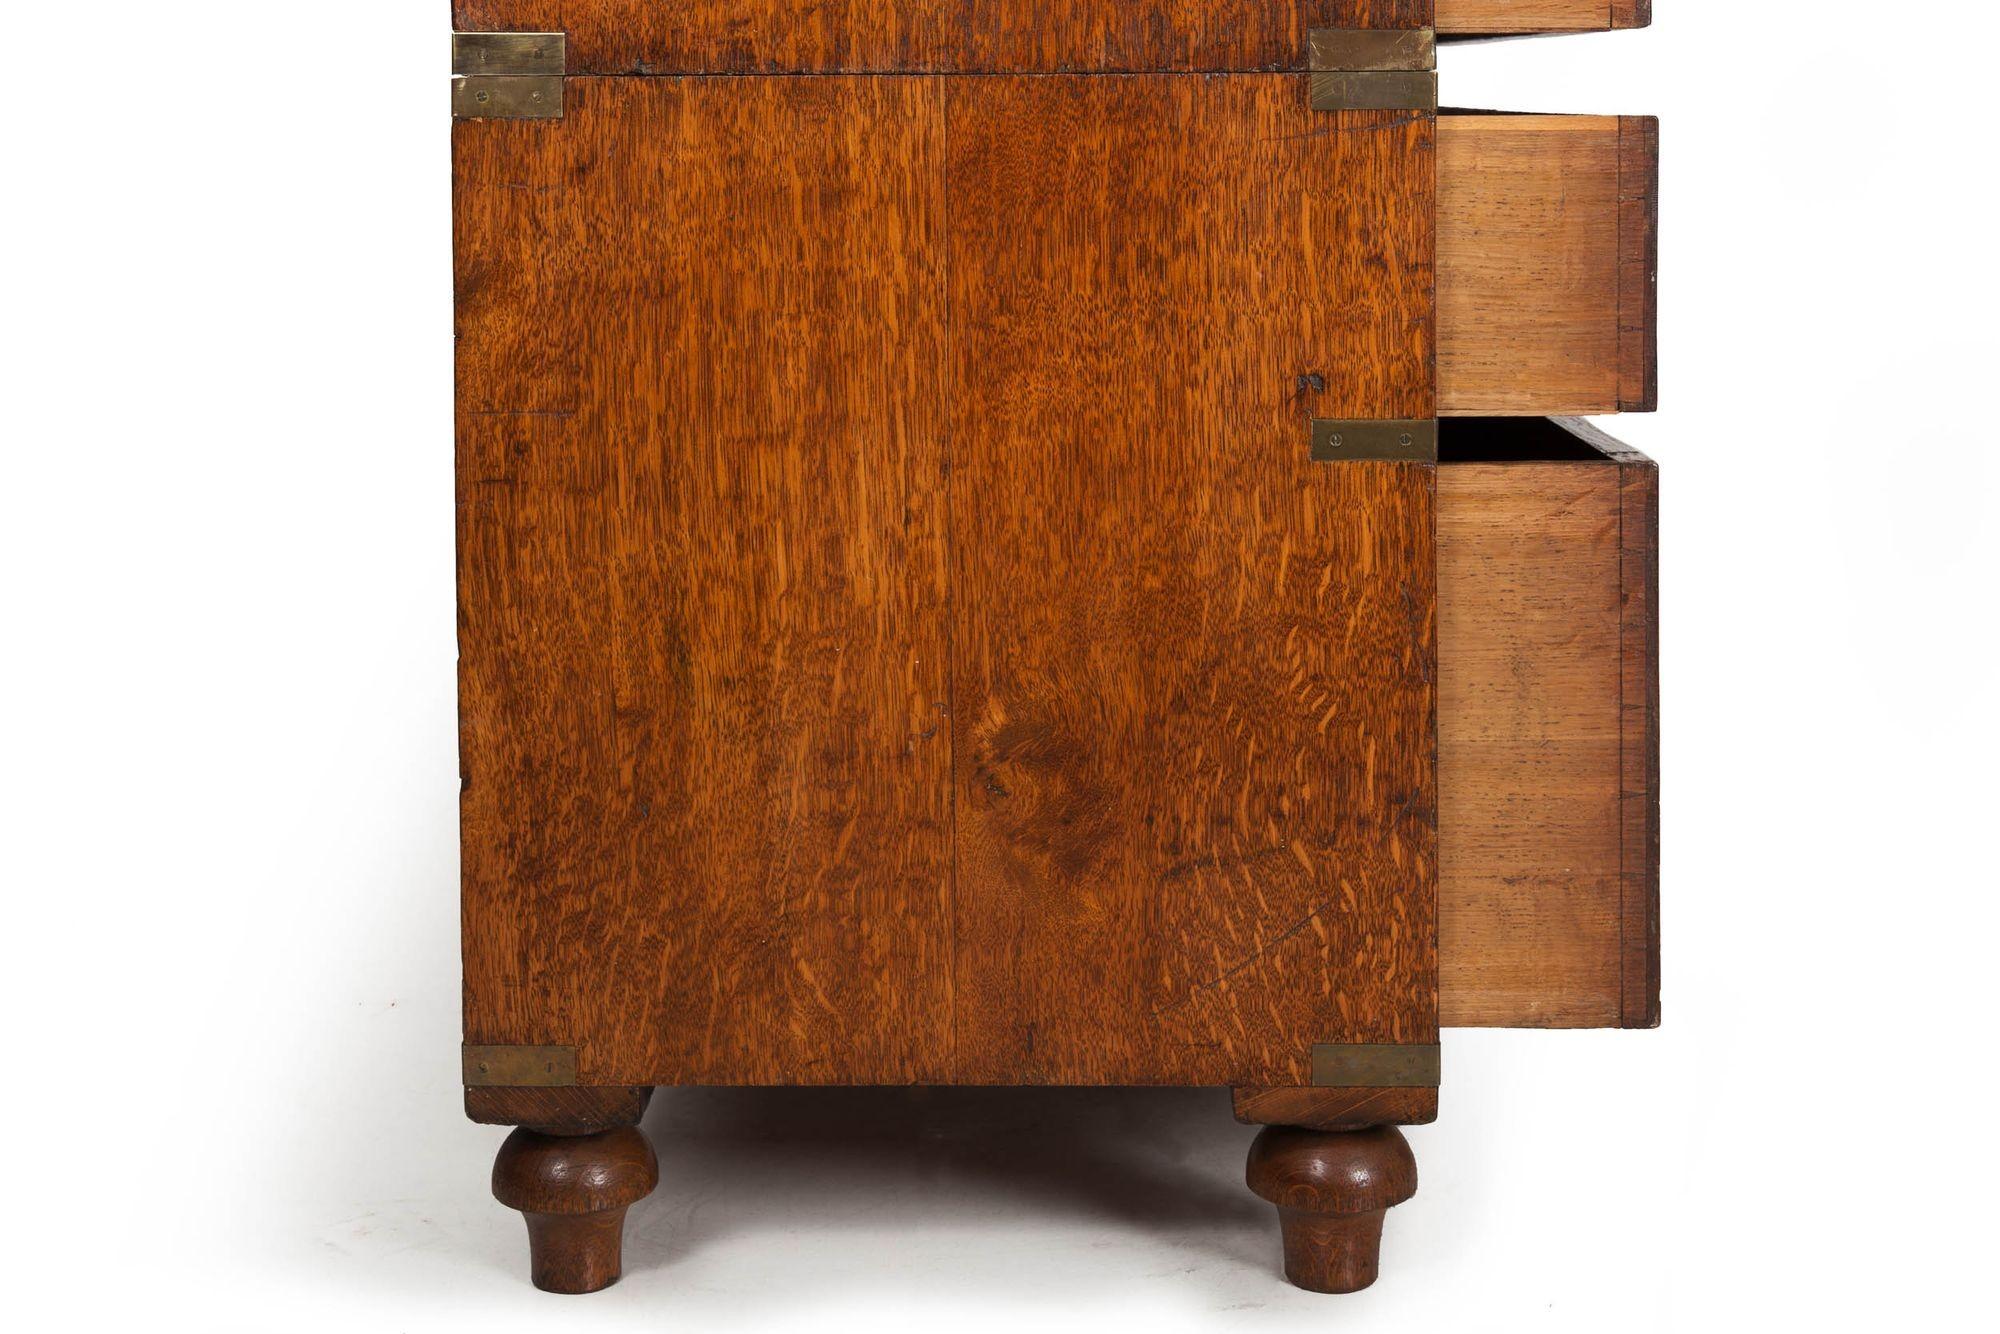 British Antique Campaign Chest of Drawers with Desk, 19th Century 11